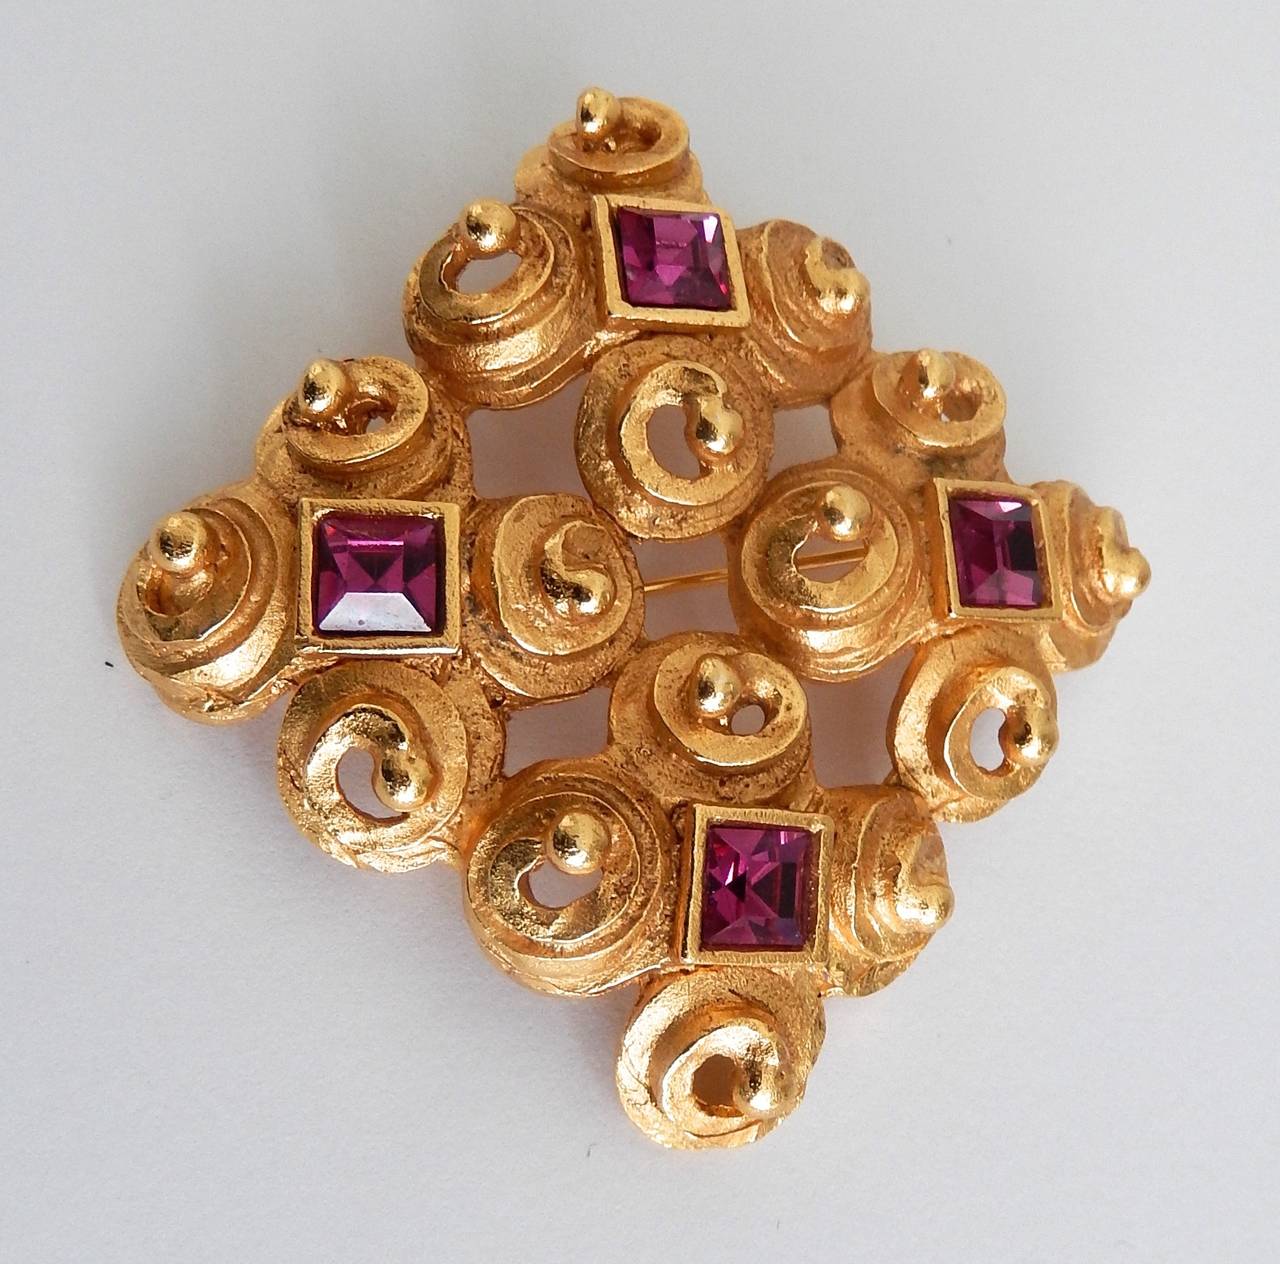 1990s Lanvin Gilt Metal Brooch In Excellent Condition For Sale In Winnetka, IL